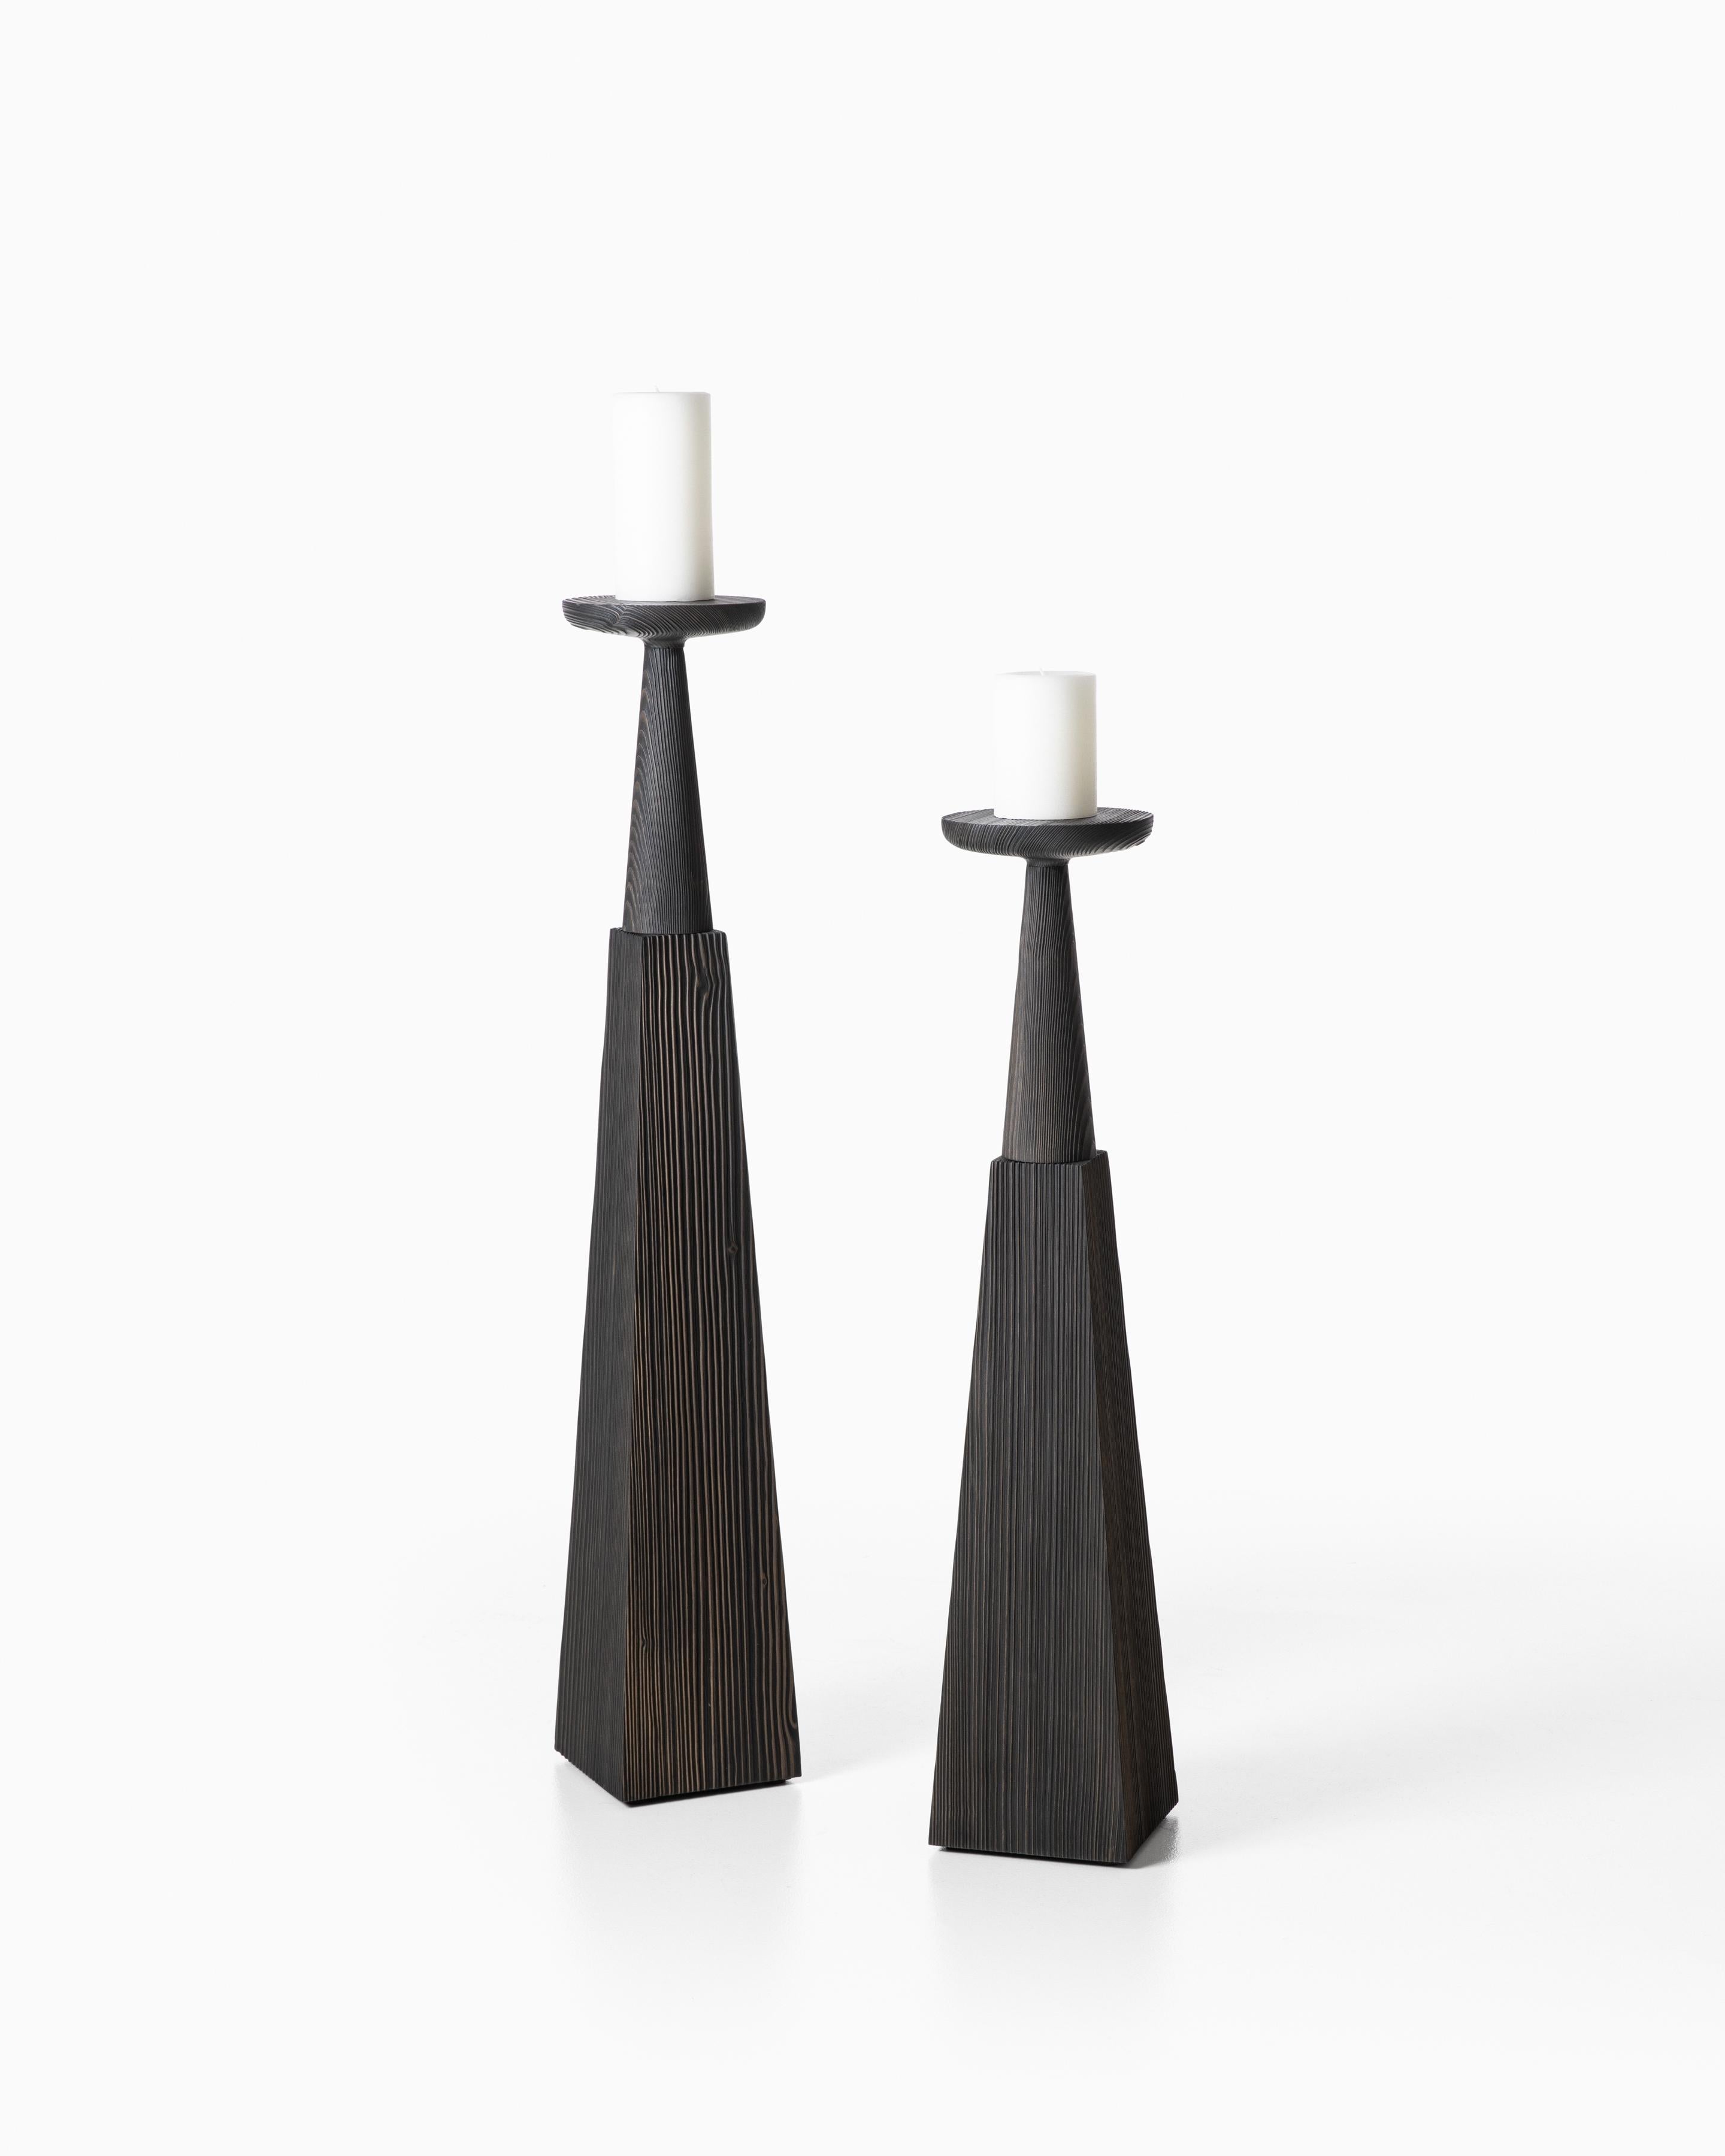 Inspired by candlesticks found in a catherdal and made of solid spruce with metal, these substantial candles provide a reverent yet calming ambiance. Brushed spruce, black tinted.

Additional Information:
Material: Brushed spruce, black tinted